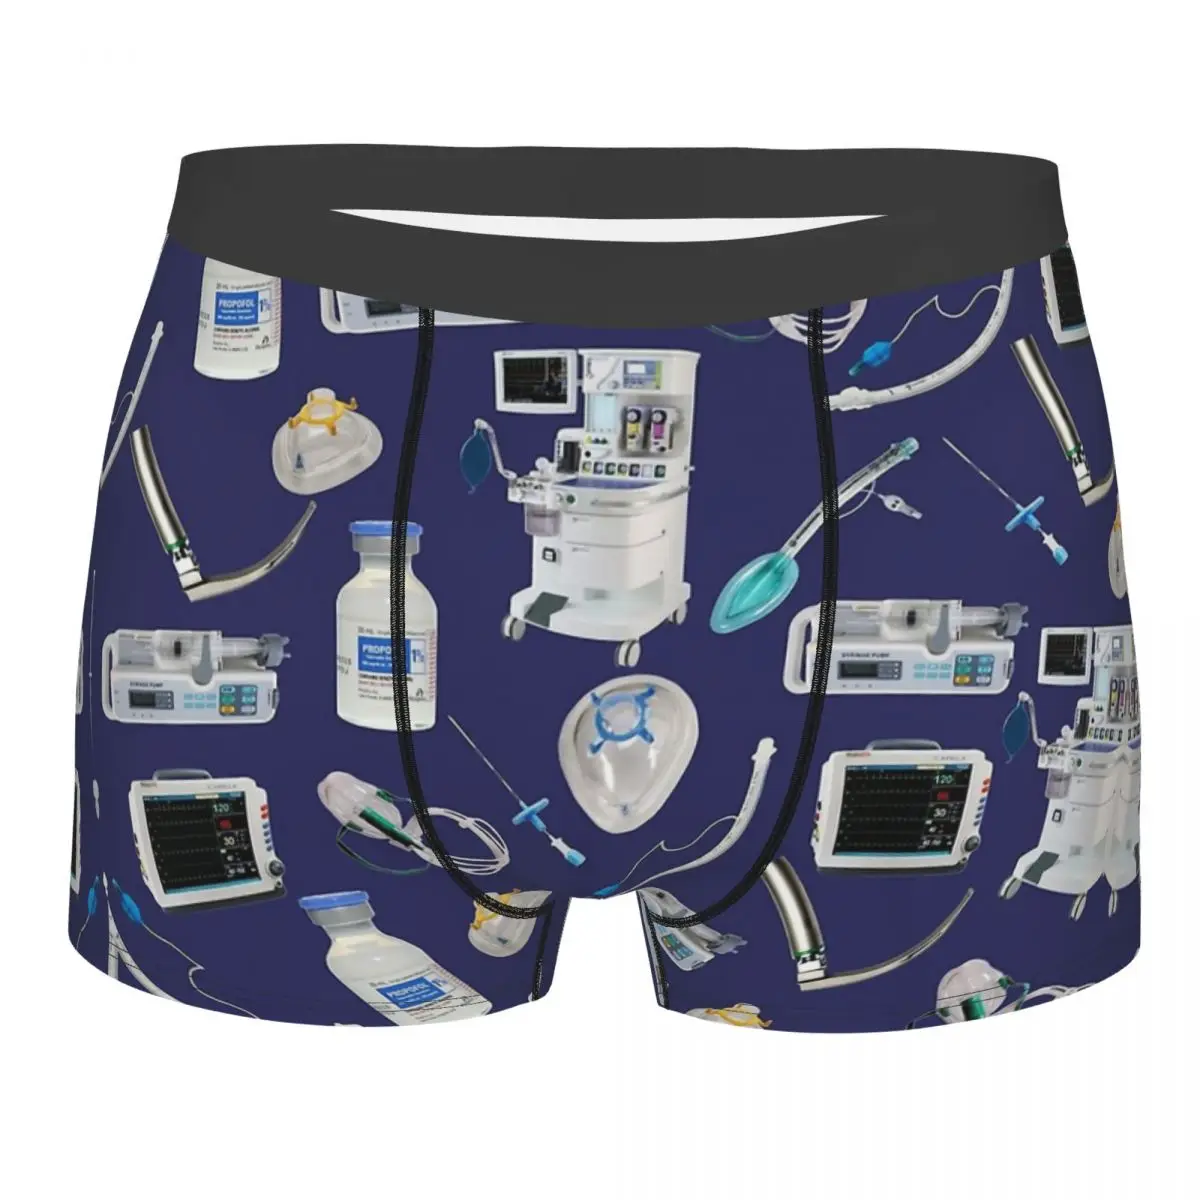 Tools Of The Trade SPACE BLUE Anesthesia Doctor 1 Men Boxer Briefs Underwear Highly Breathable Top Quality Birthday Gifts tools of the trade maroon anesthesia anaesthesia socks warm winter crazy set thermal man winter socks for men women s